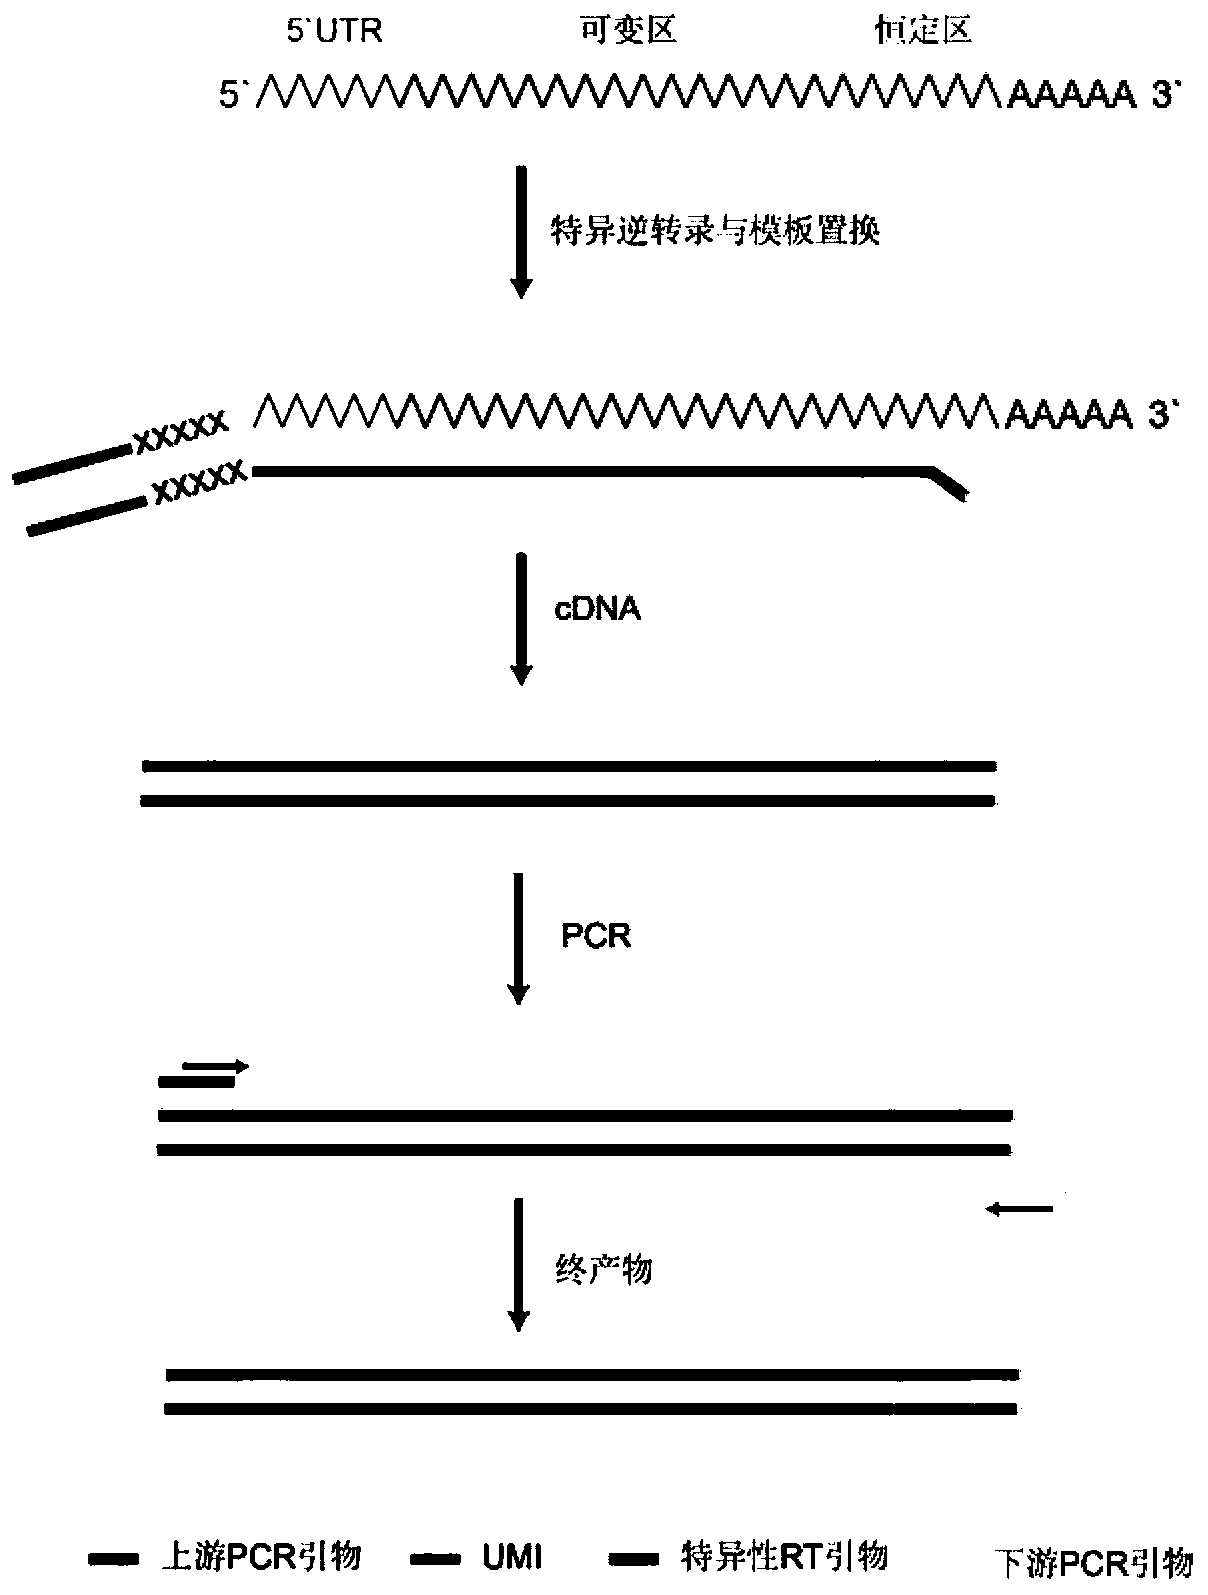 Immunological group library method for discriminating cross reaction between samples and self-cross-reaction of independent sample